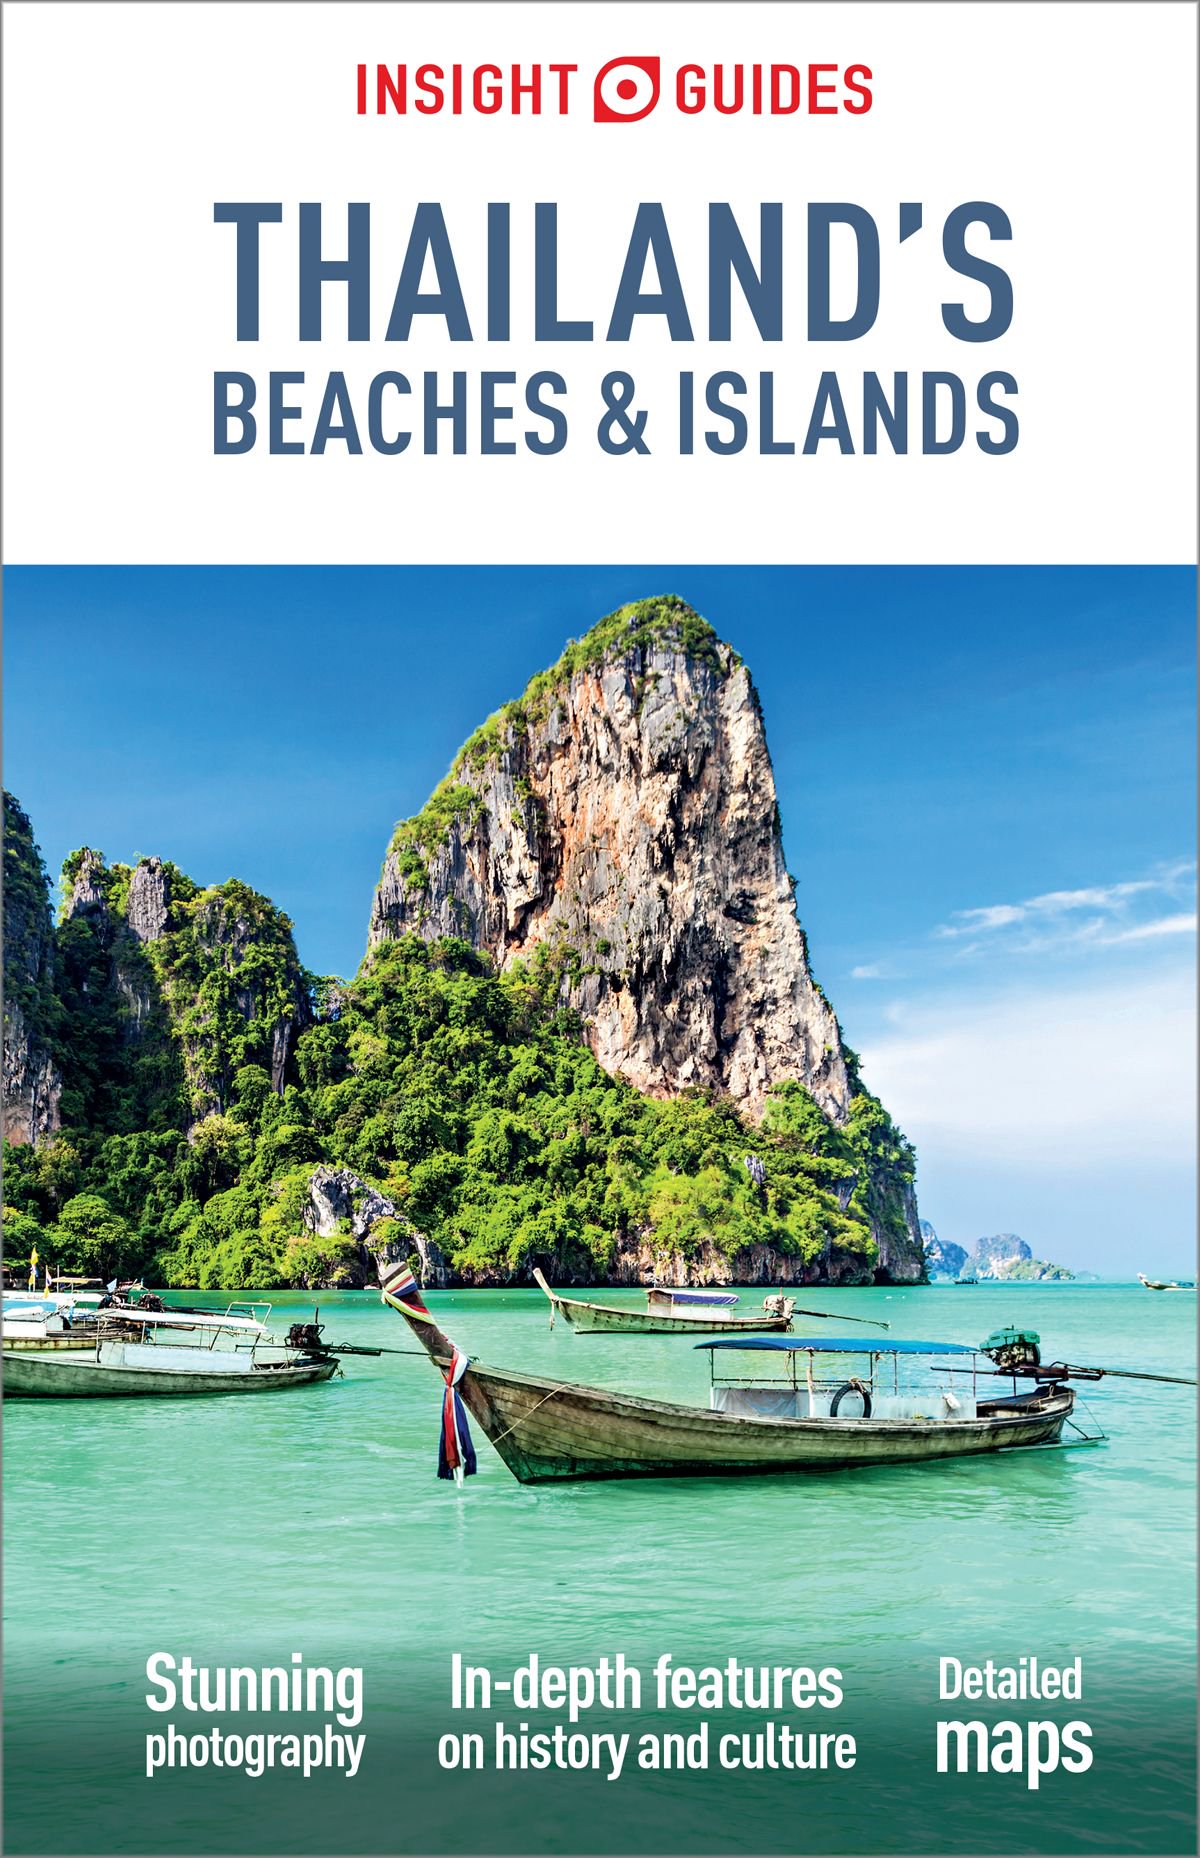 Insight Guides Thailands Beaches and Islands | Insight Guides